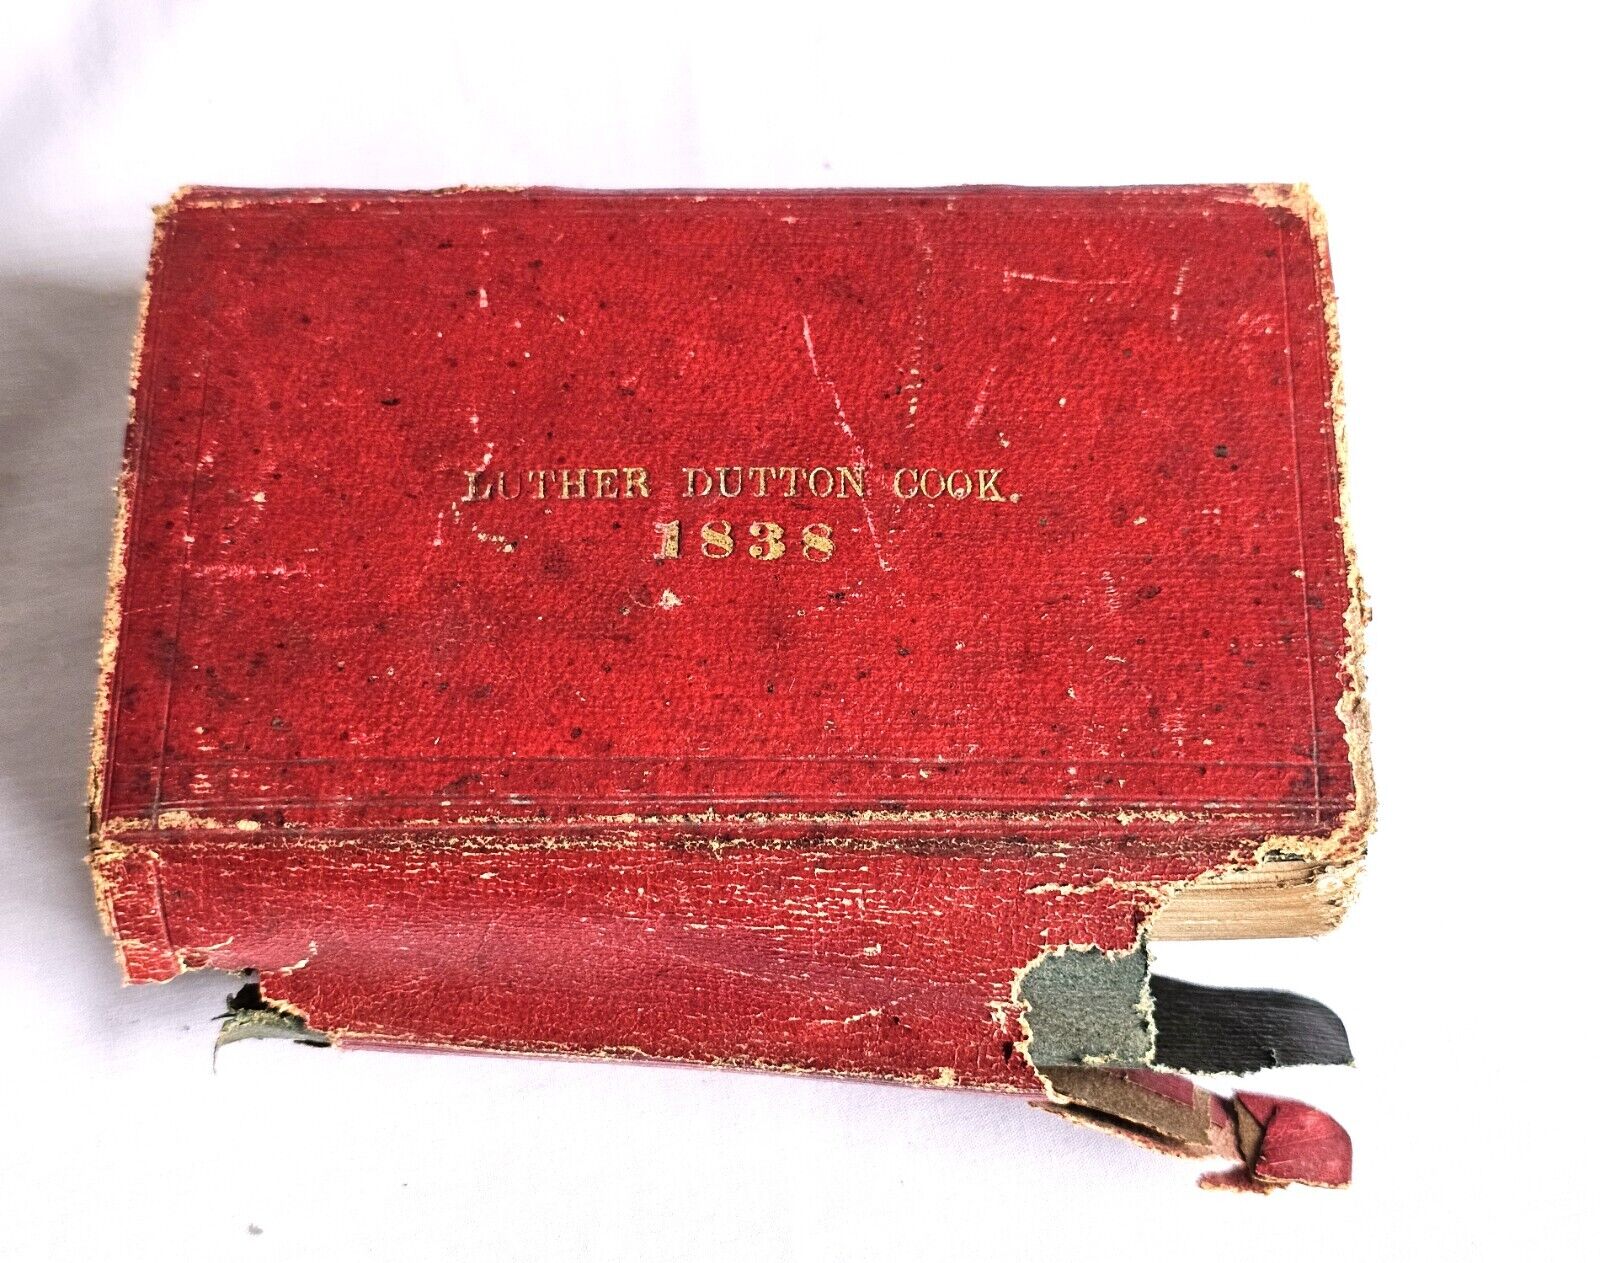 ANTIQUE LUTHERAN BIBLE 1838 SMALL PRAYER BOOK USE IN NY -DUTTON COOK